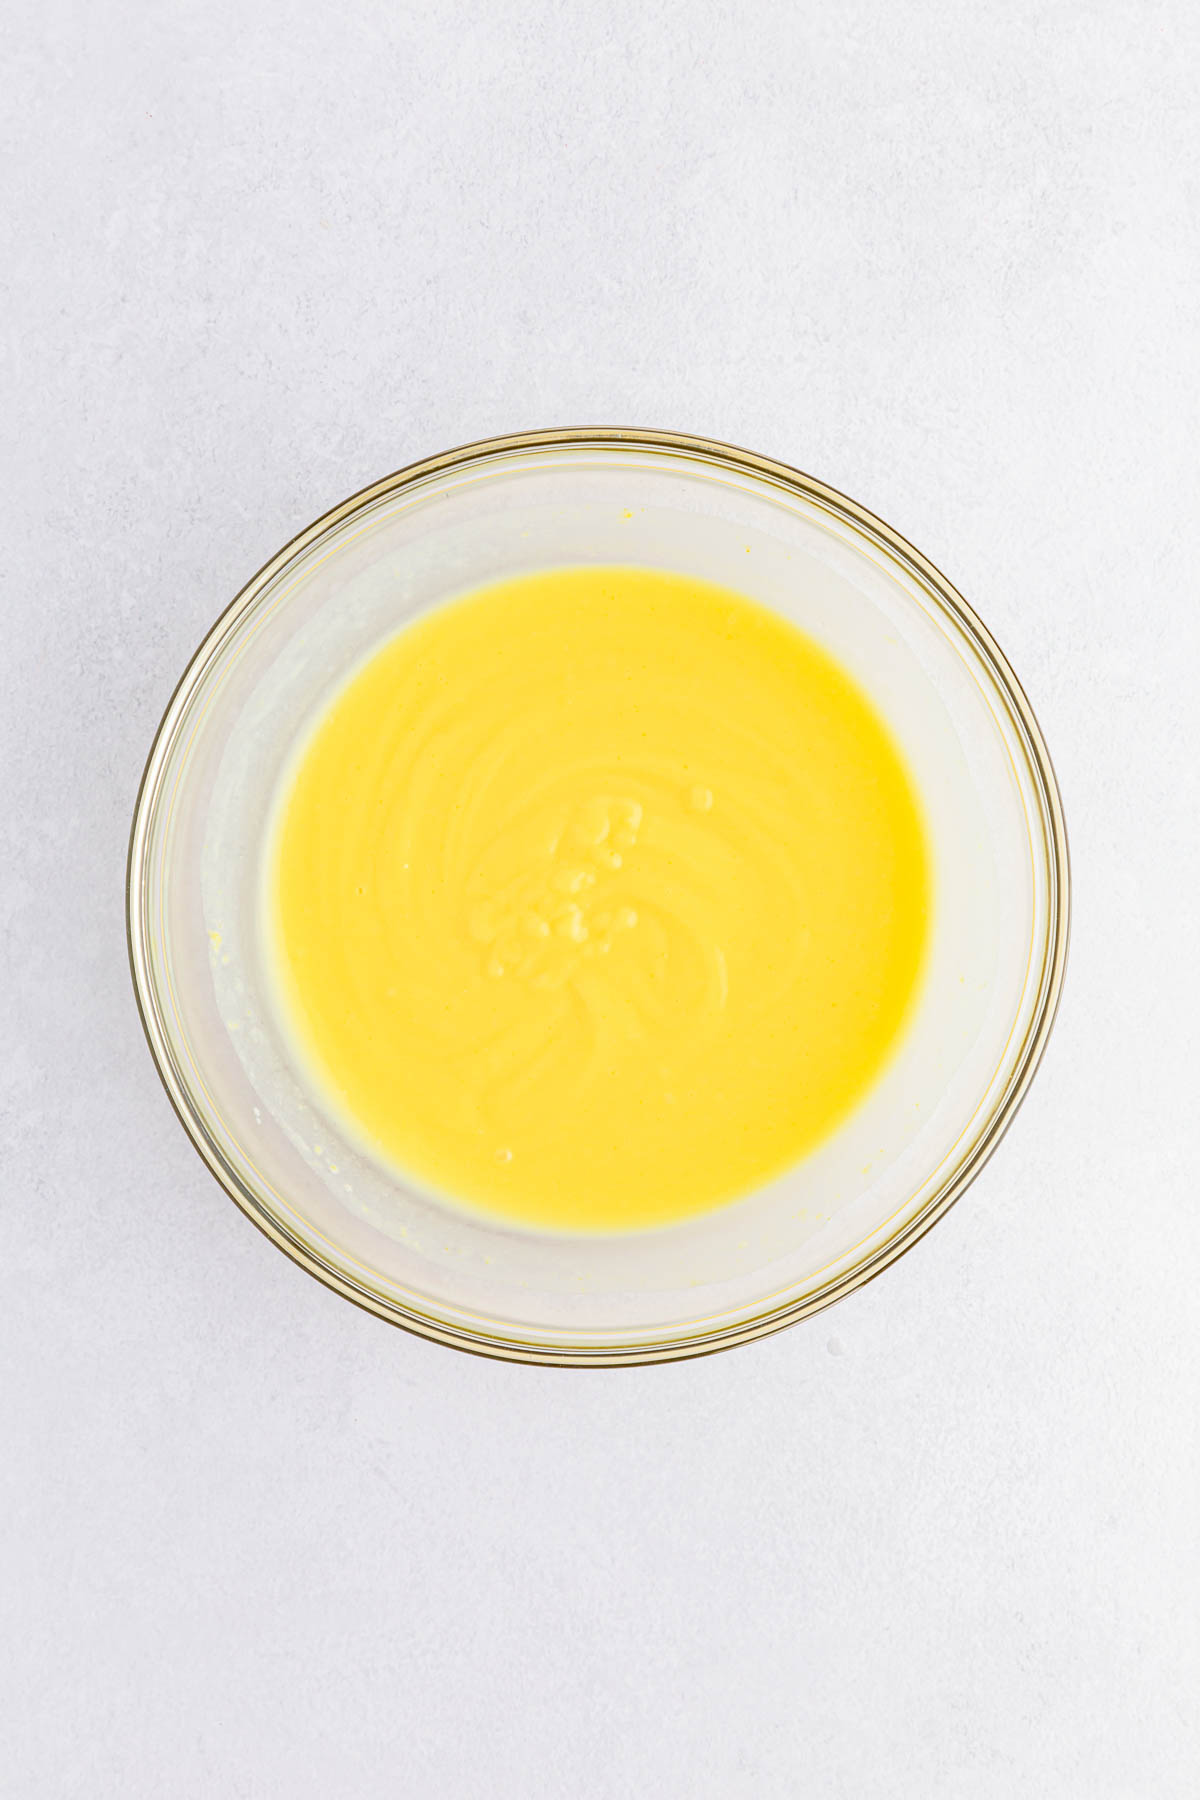 Vanilla pudding in clear glass bowl